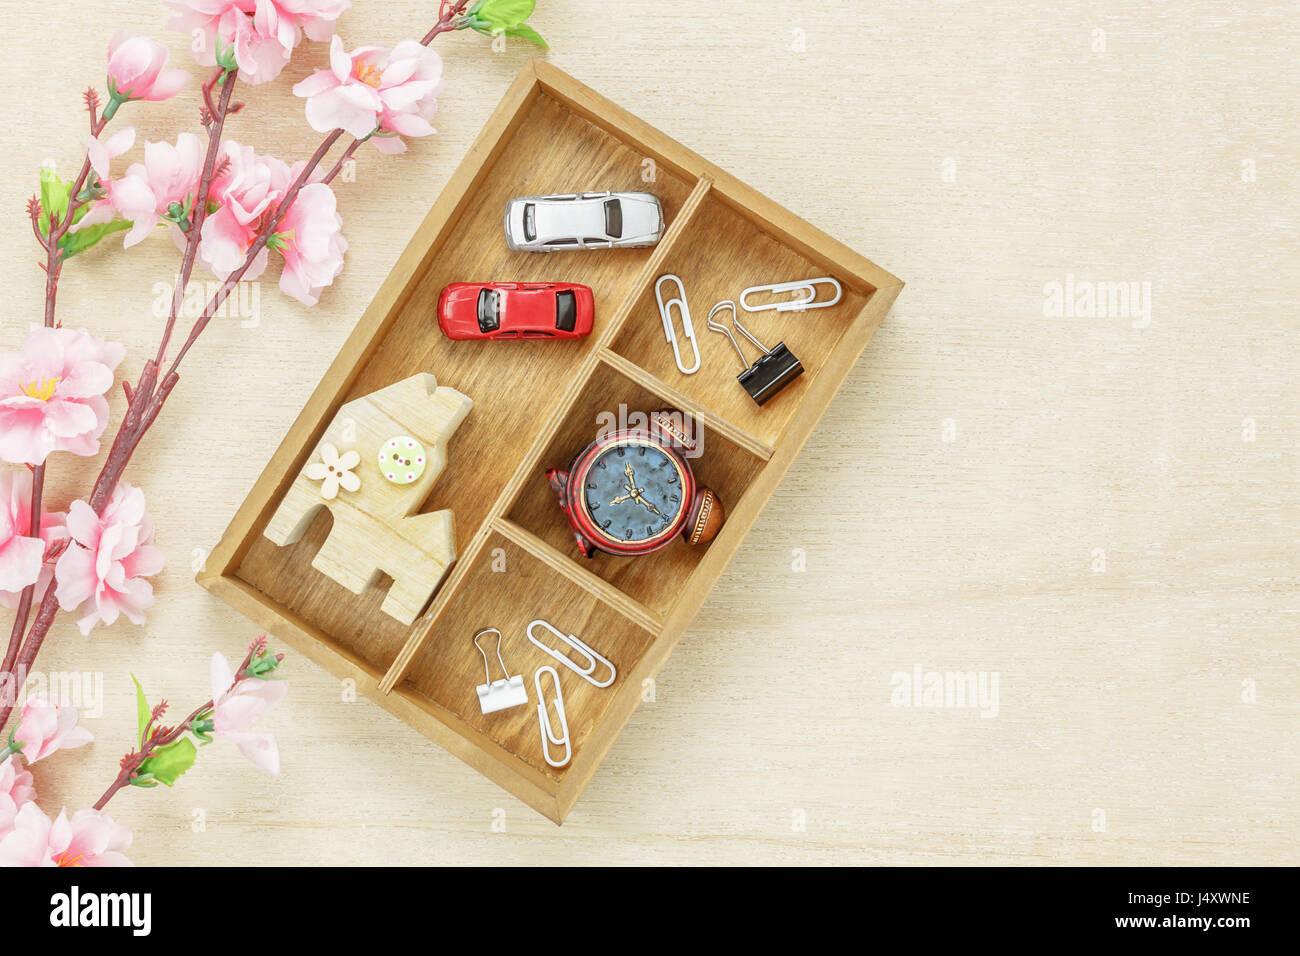 Top view business concept. Wood house  also car and clock on wooden shelf.The beautiful pink flower on wood background with copy space. Stock Photo